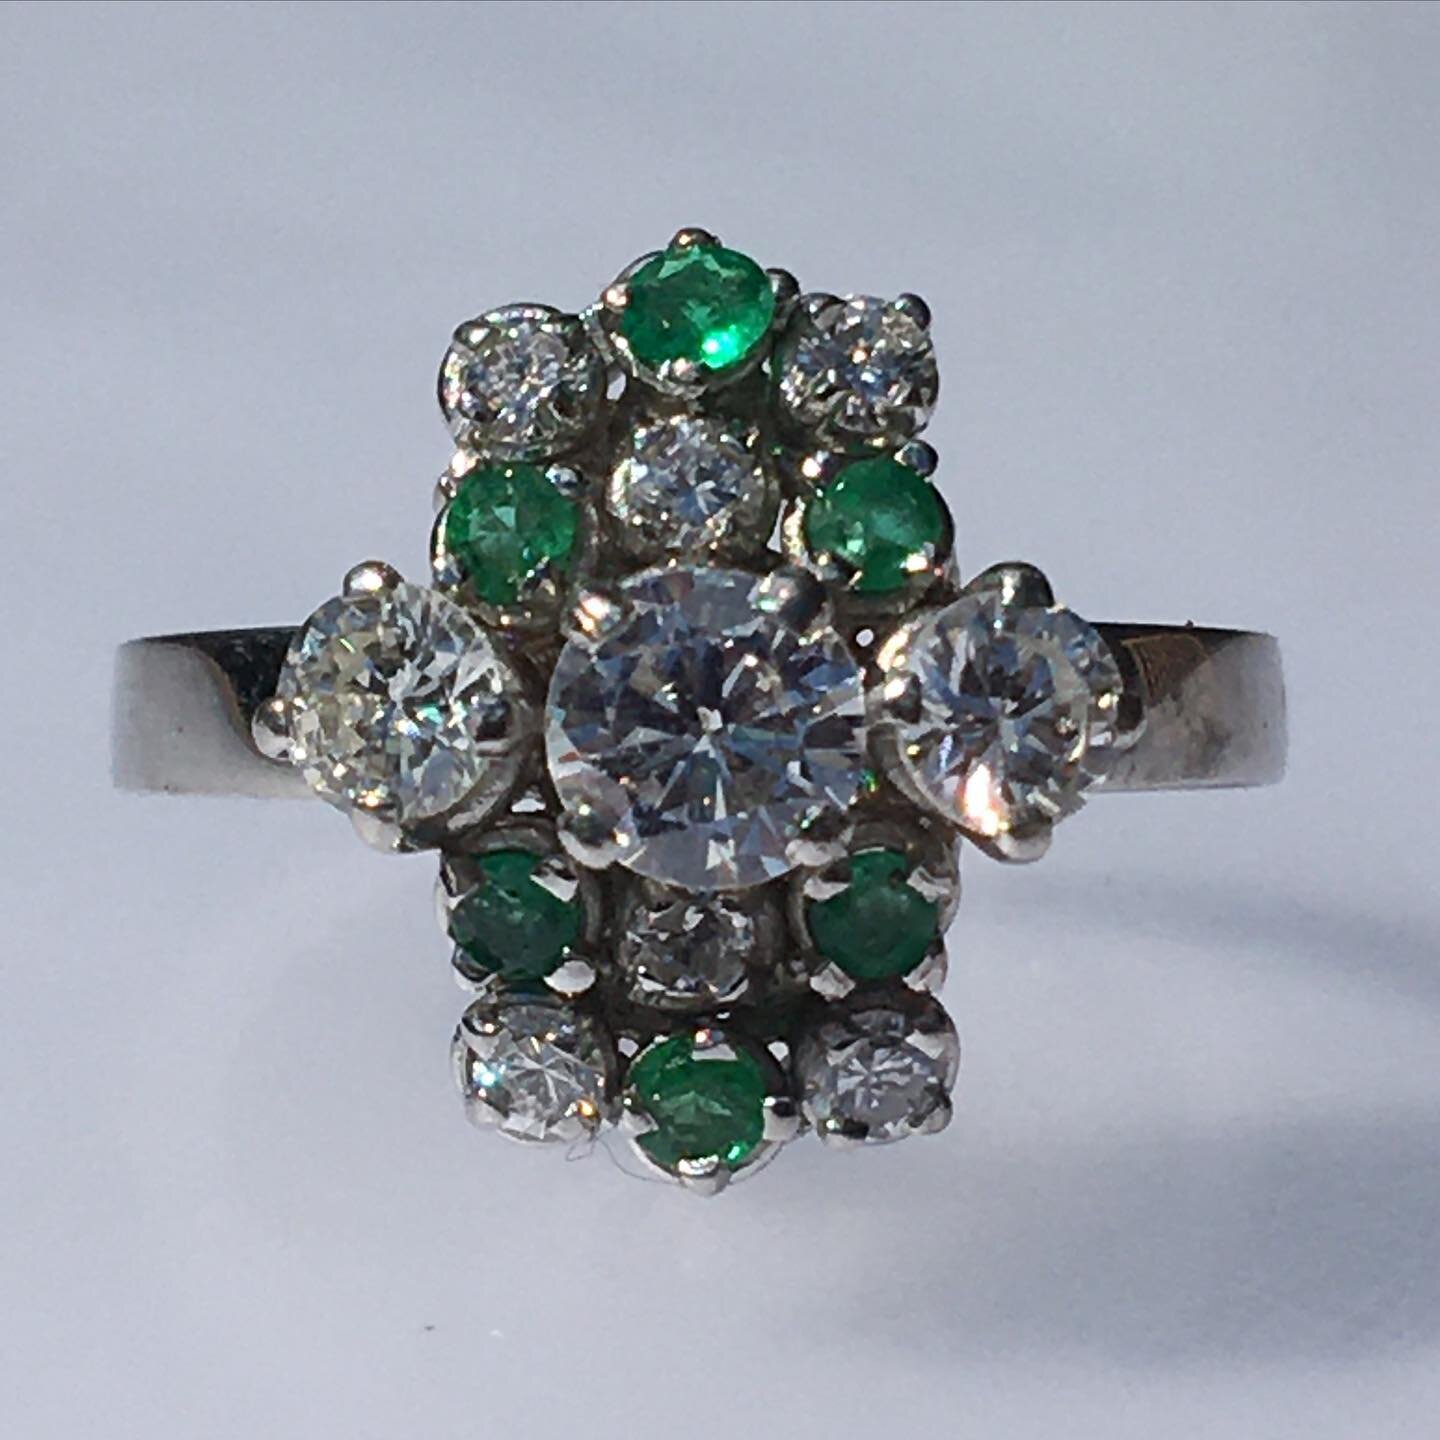 Diamond emerald and platinum ring. The stones came from 2 old rings, to make a new engagement ring.
#diamondandemerald #restyle #engagementring #handmade #onmybench